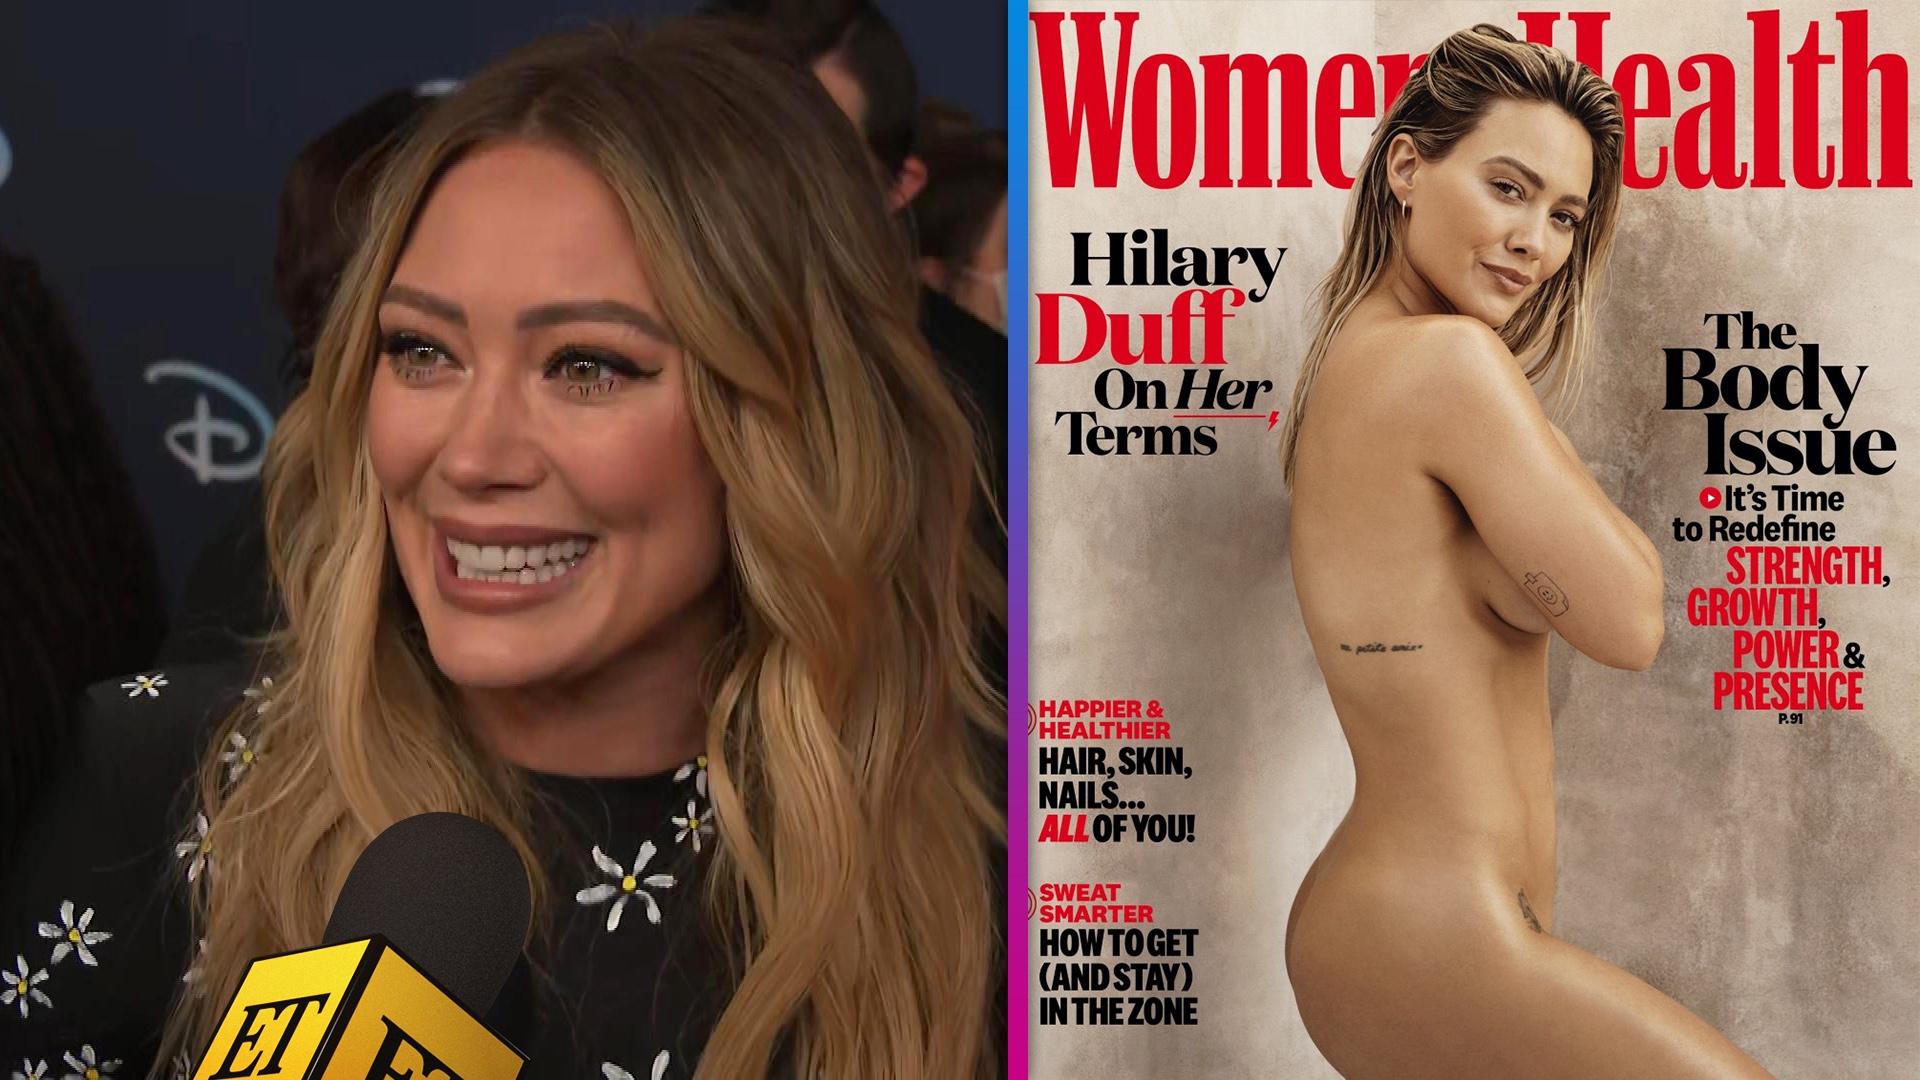 Hilary Duff Reveals Why It Was Scary to Pose Nude for Magazine Cover Shoot (Exclusive) Entertainment Tonight photo